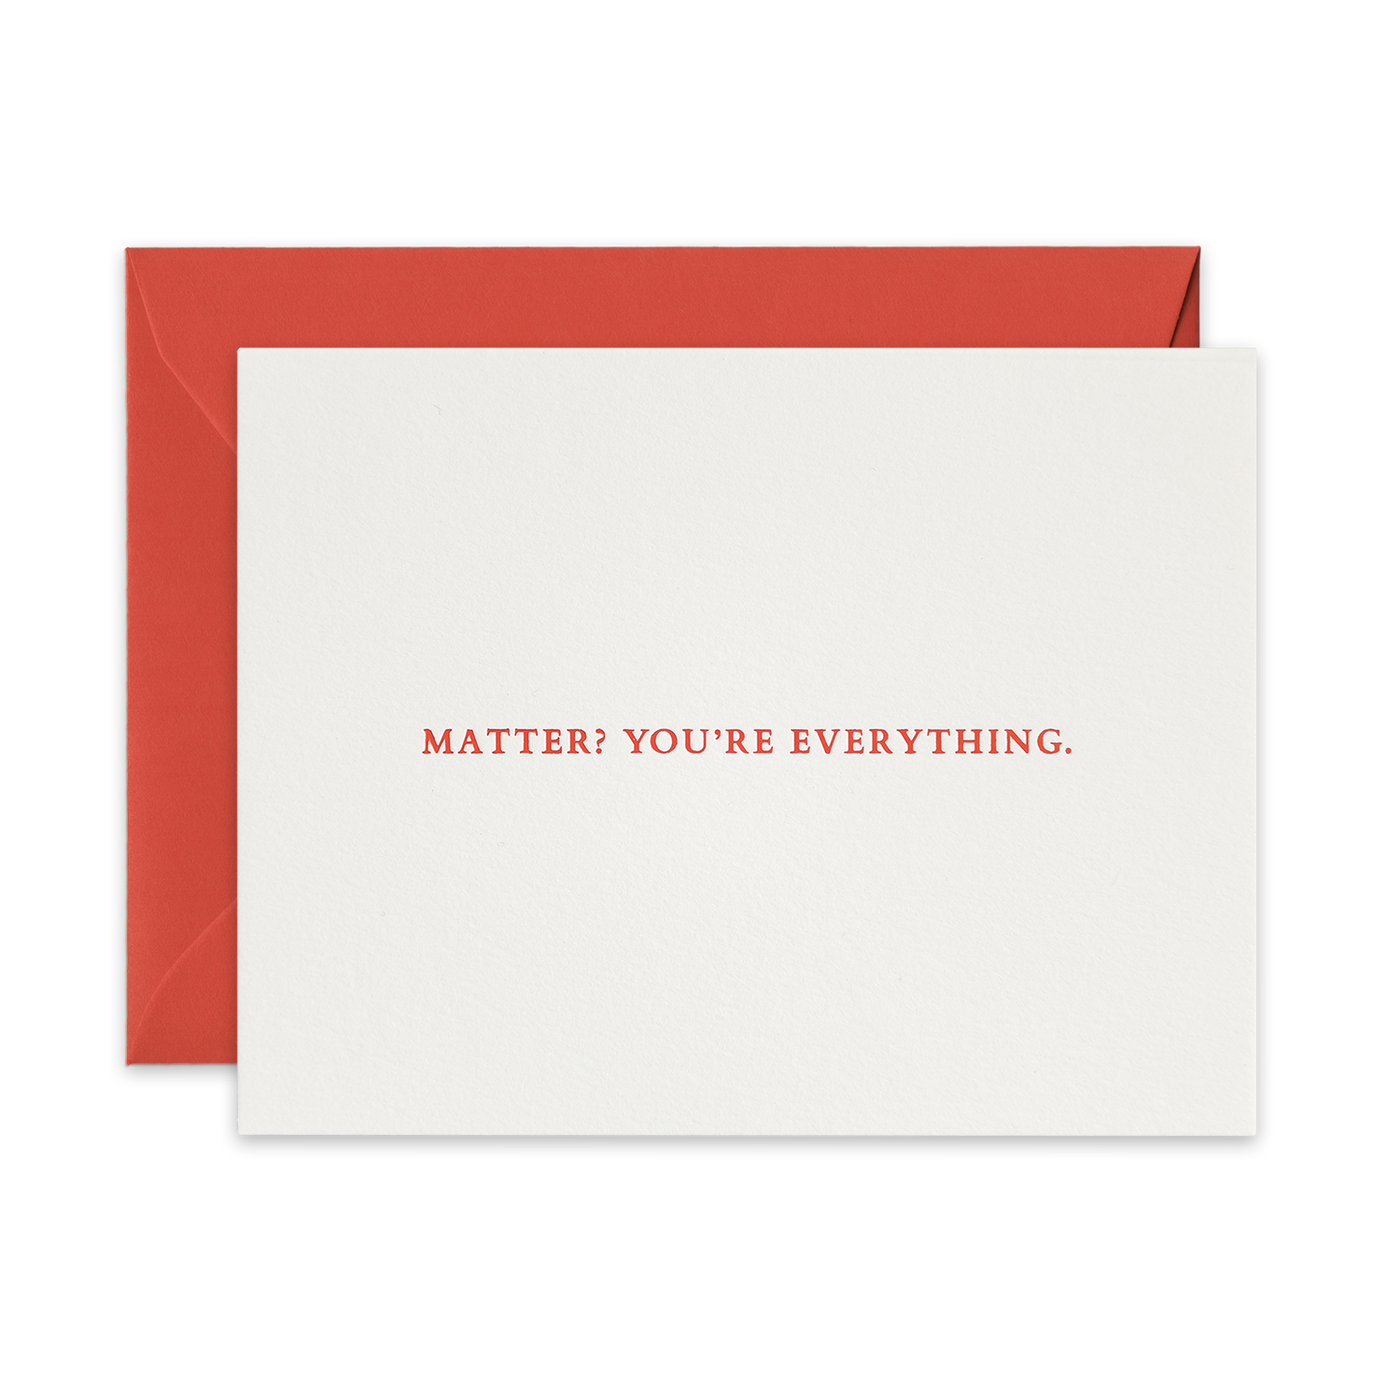 Peach foil letterpress greeting card by beknown. Matter? You're everything.